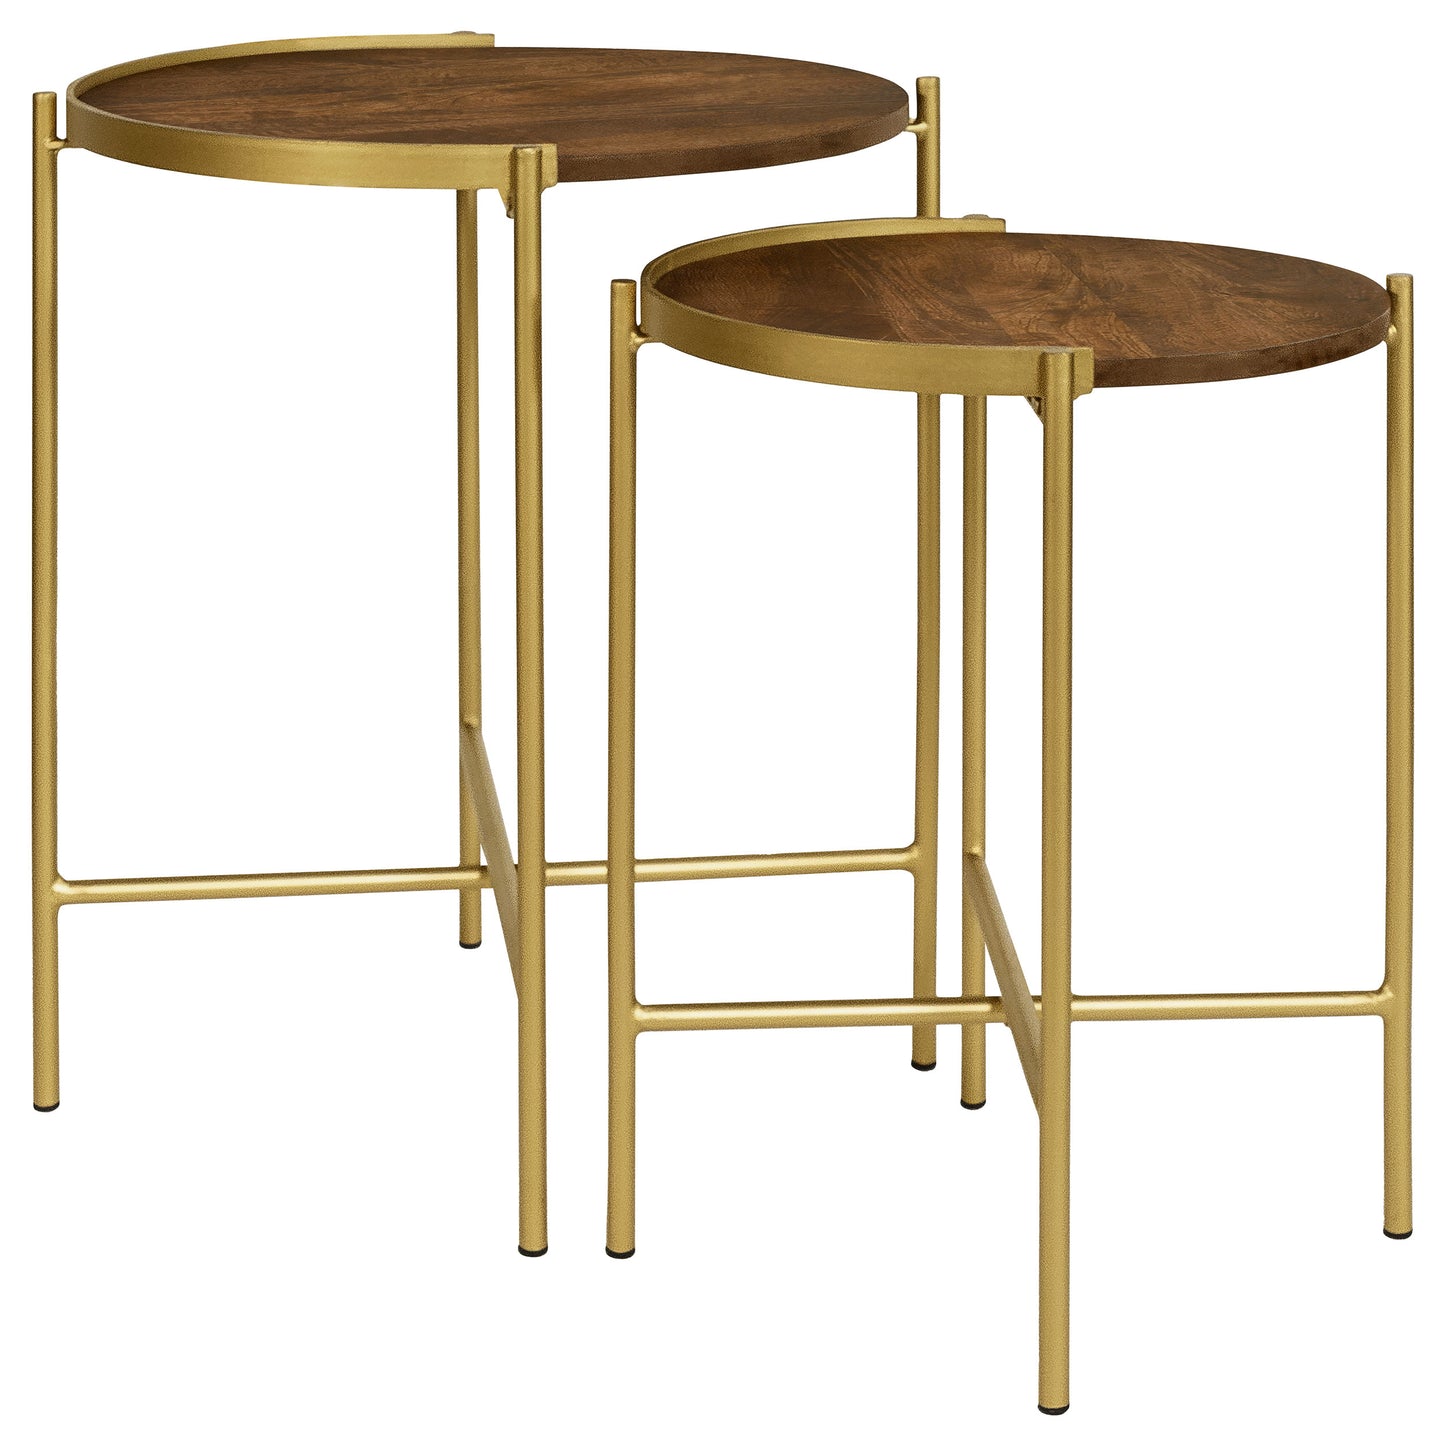 Malka 2-piece Round Nesting Table Dark Brown and Gold